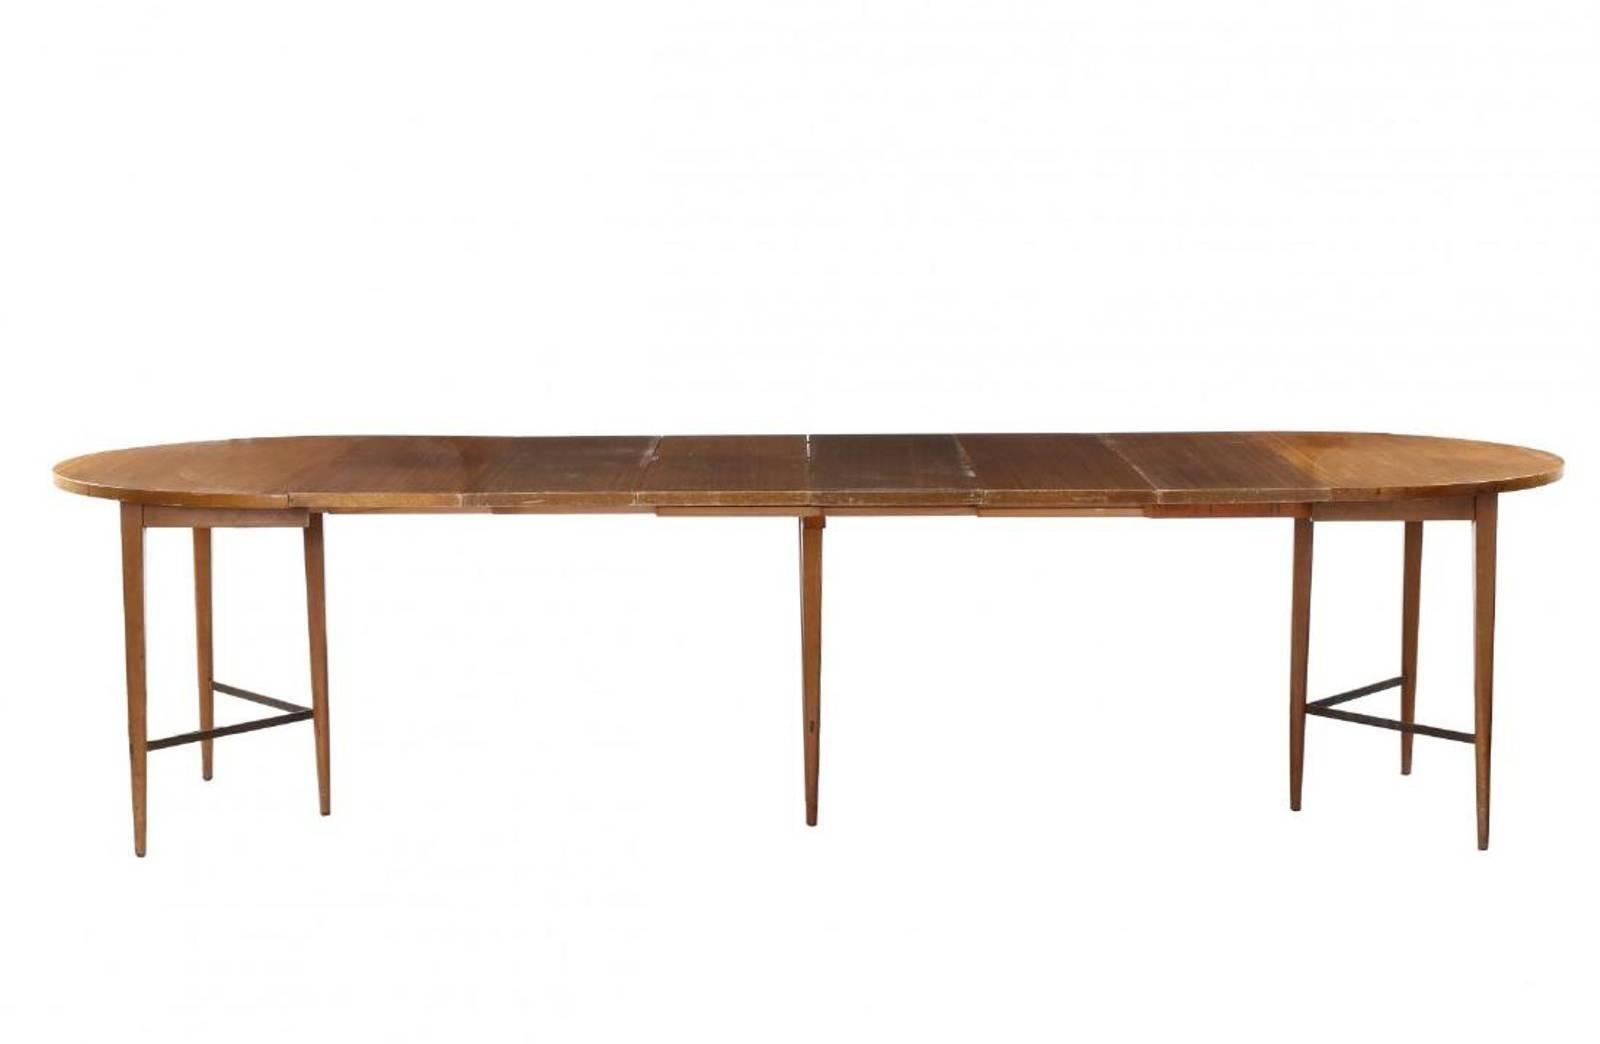 Paul McCobb Modern Dining Table, American, circa 1950s. This table is currently being refinished and can be completed in your choice of color. The price noted below INCLUDES refinishing in your choice of color. This versatile table easily changes